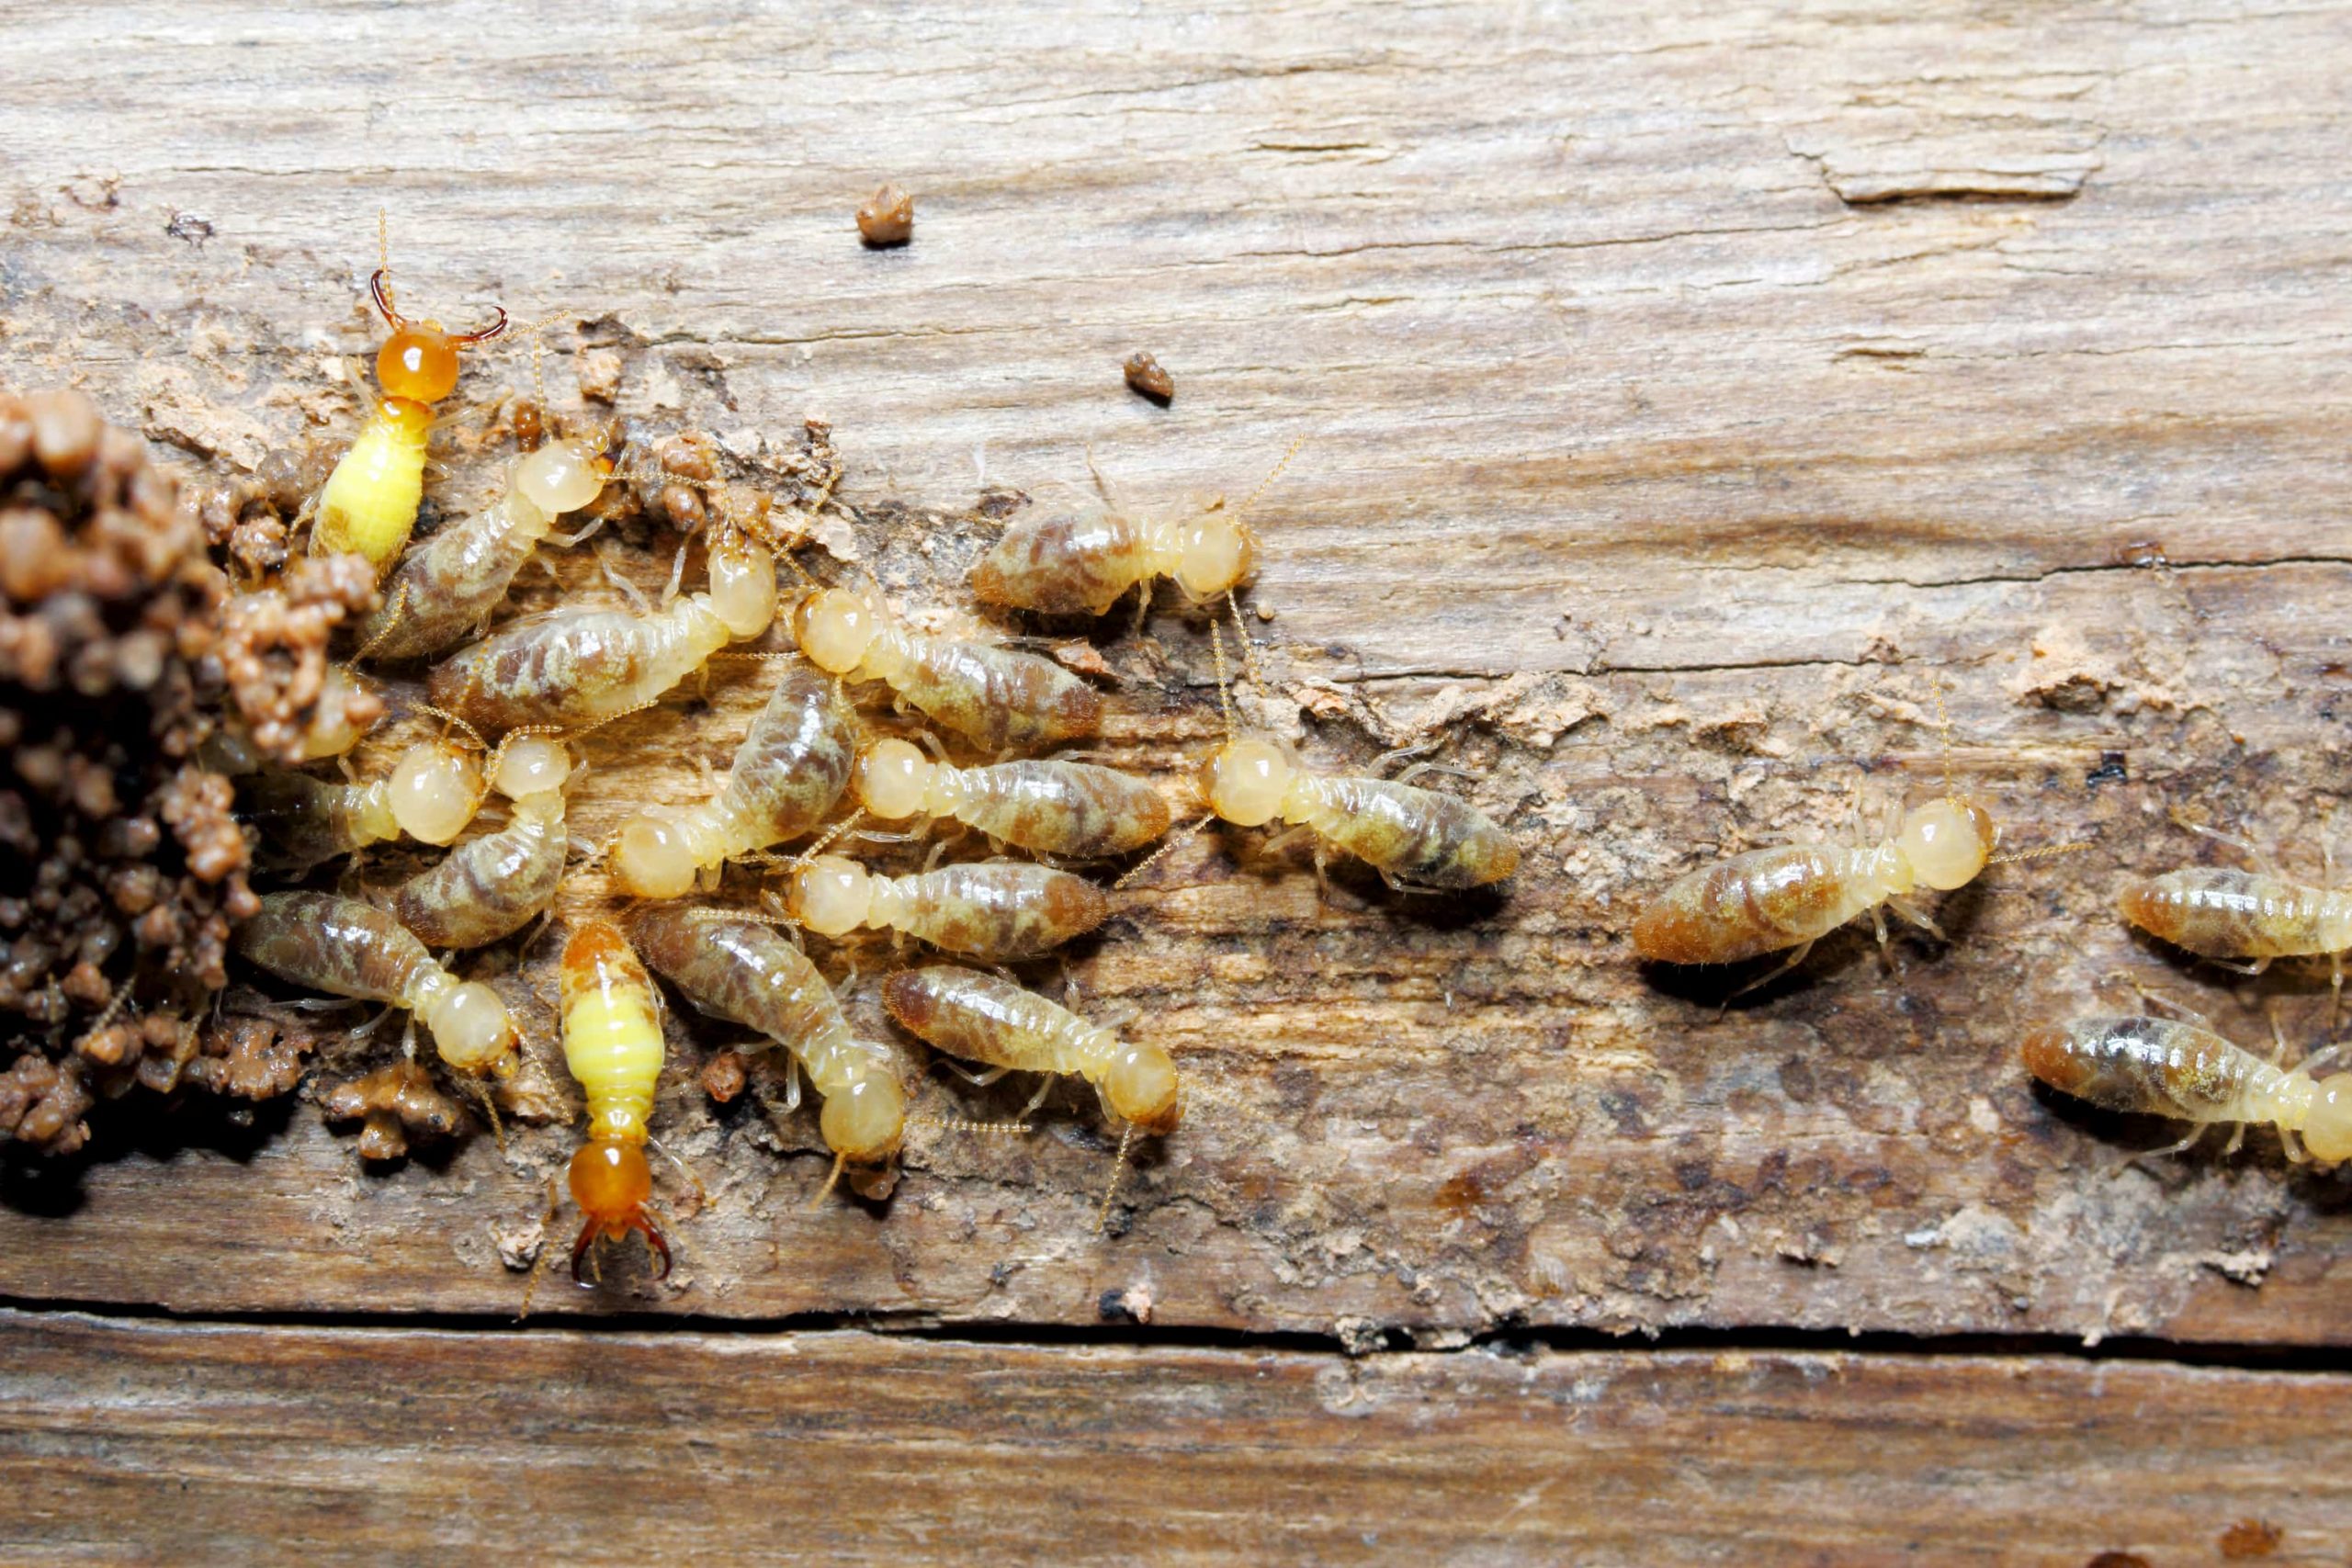 Termite Identification and Prevention: Signs to Watch Out For